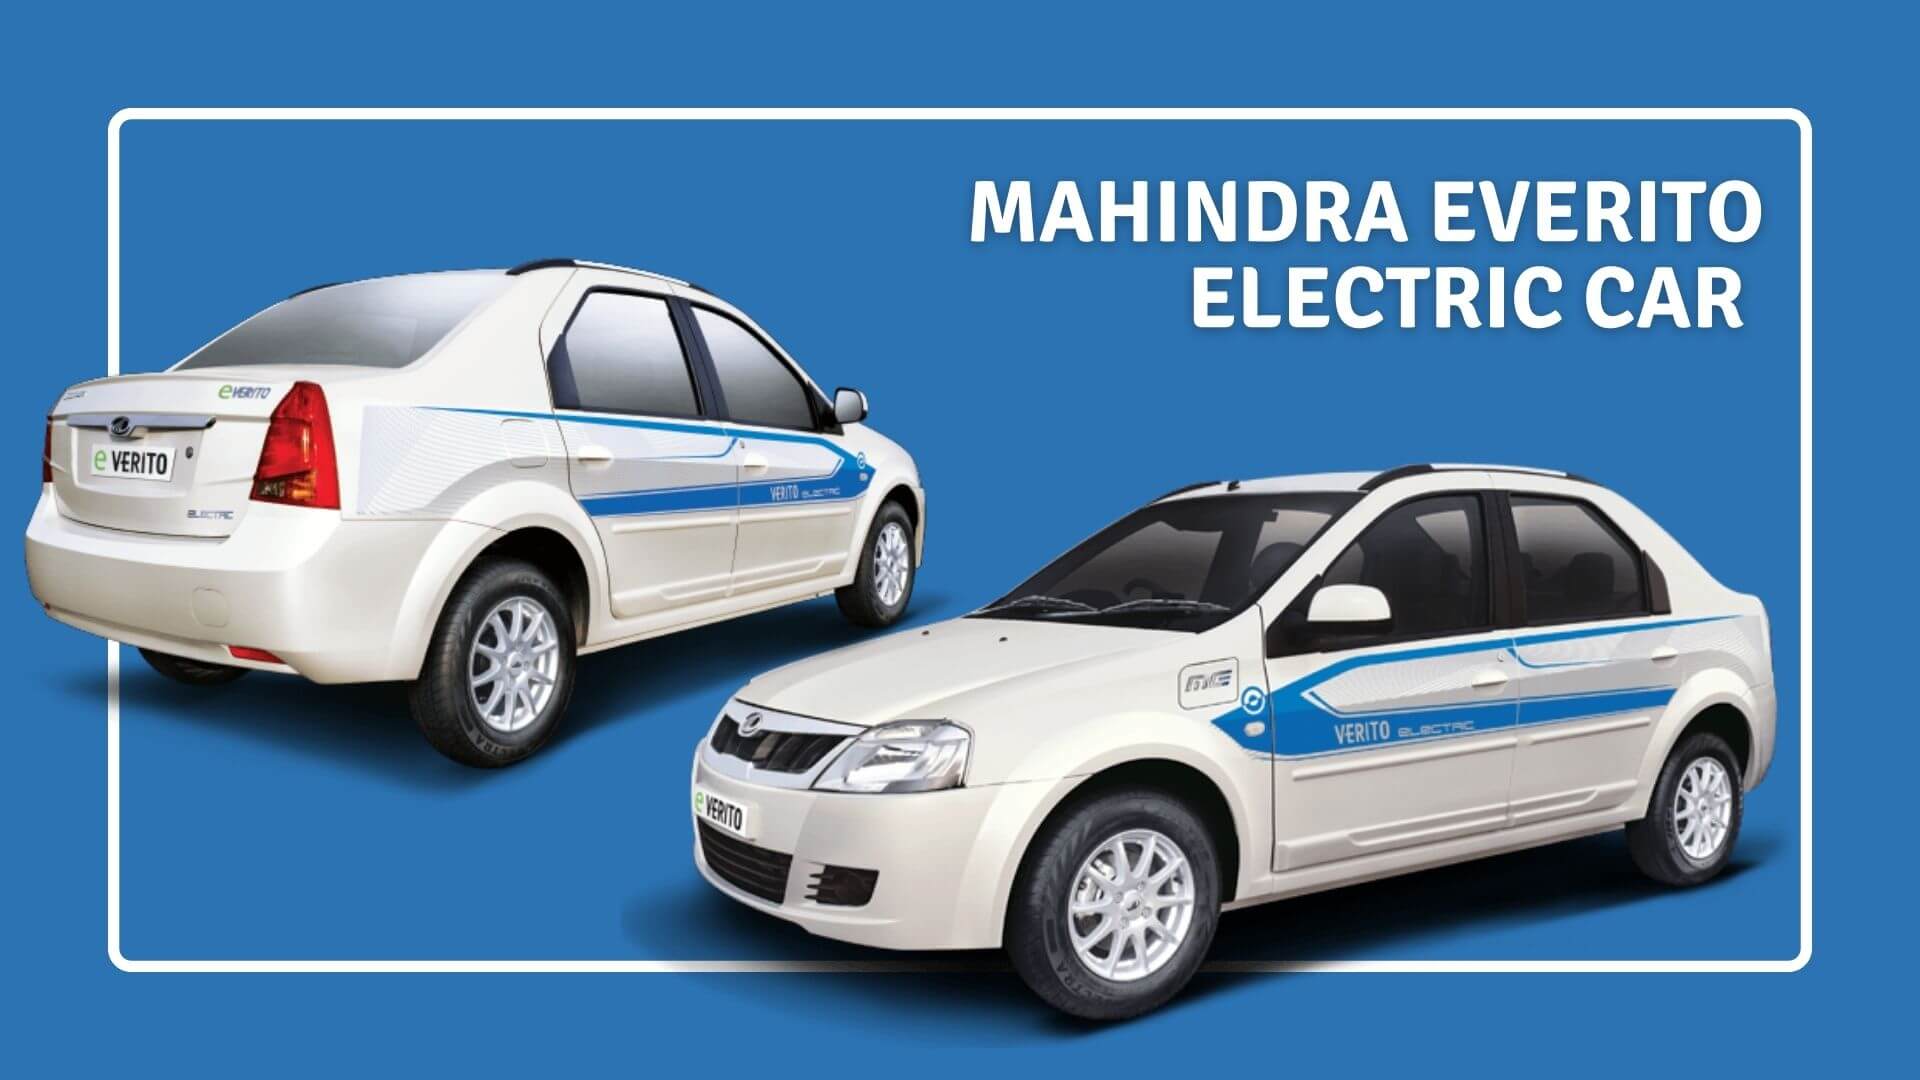 https://e-vehicleinfo.com/mahindra-everito-electric-car-price-range-and-specifications/